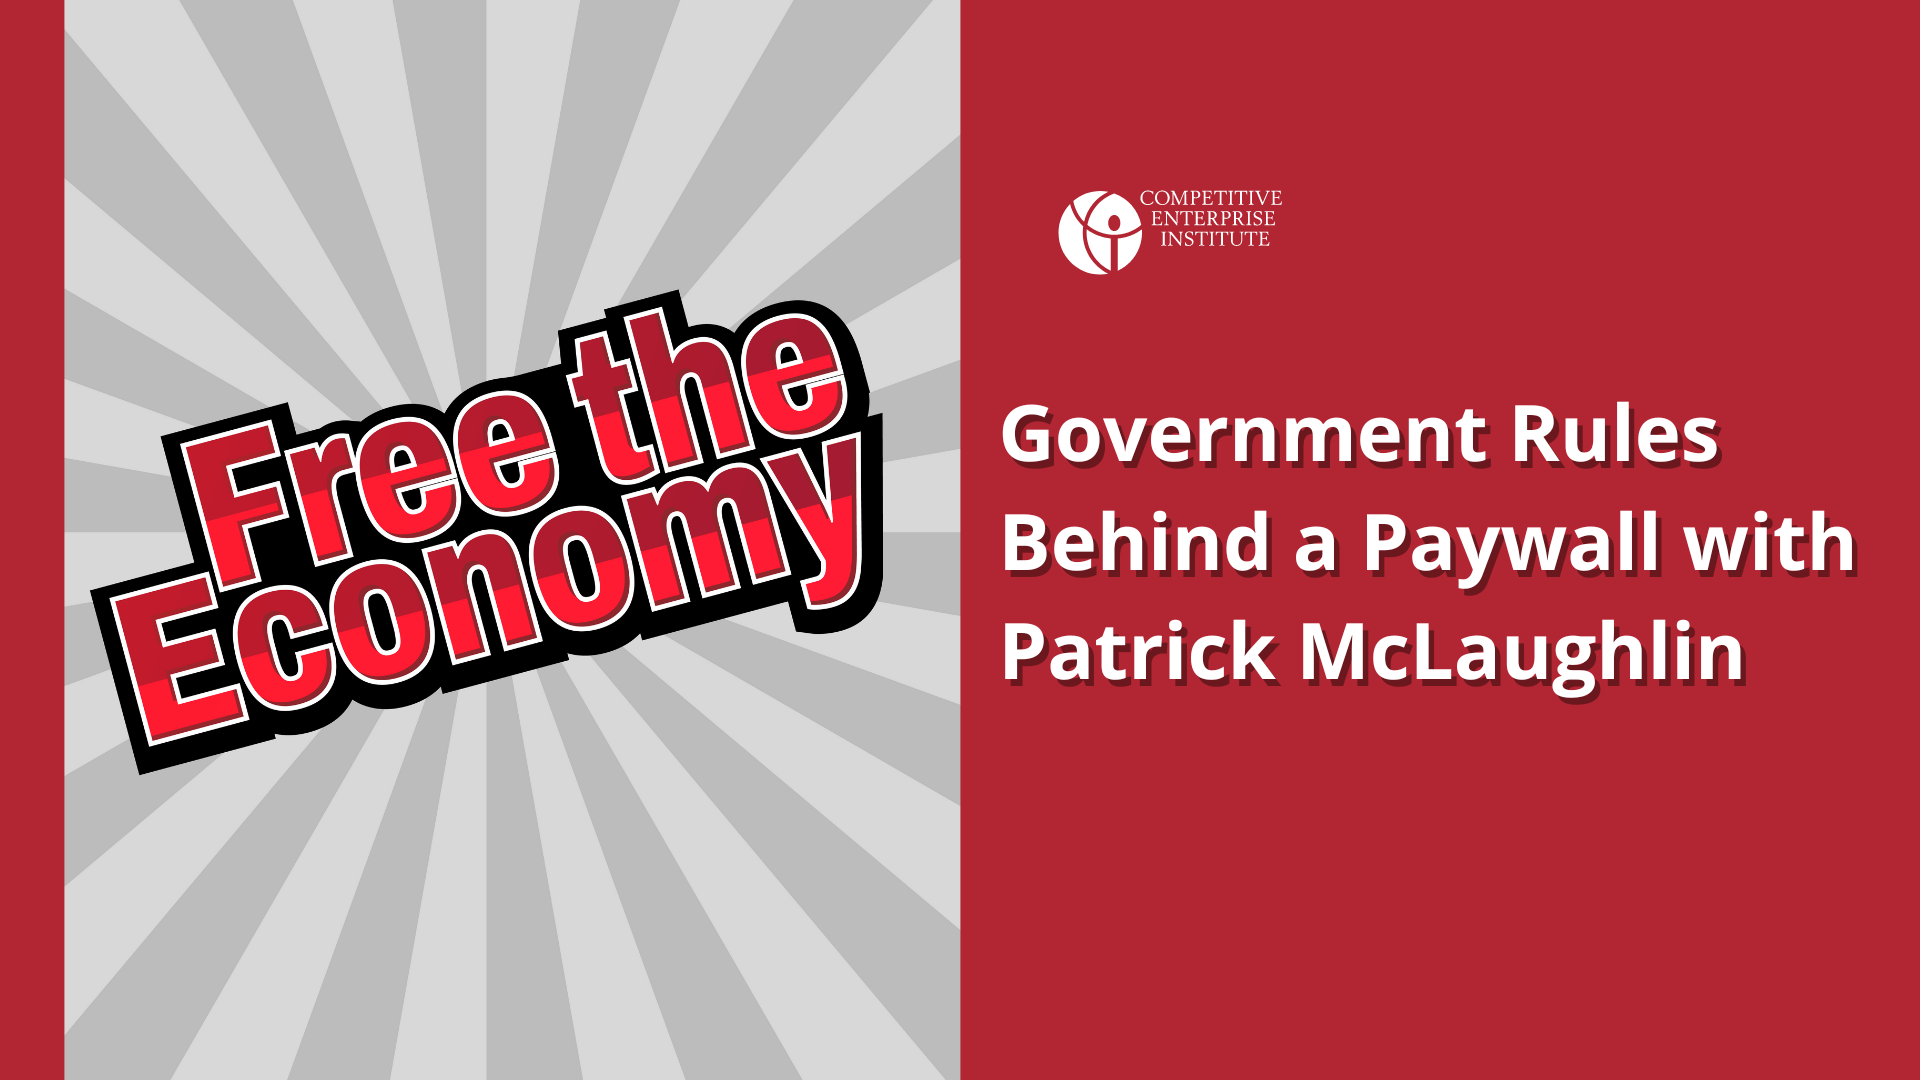 Government Rules Behind a Paywall with Patrick McLaughlin